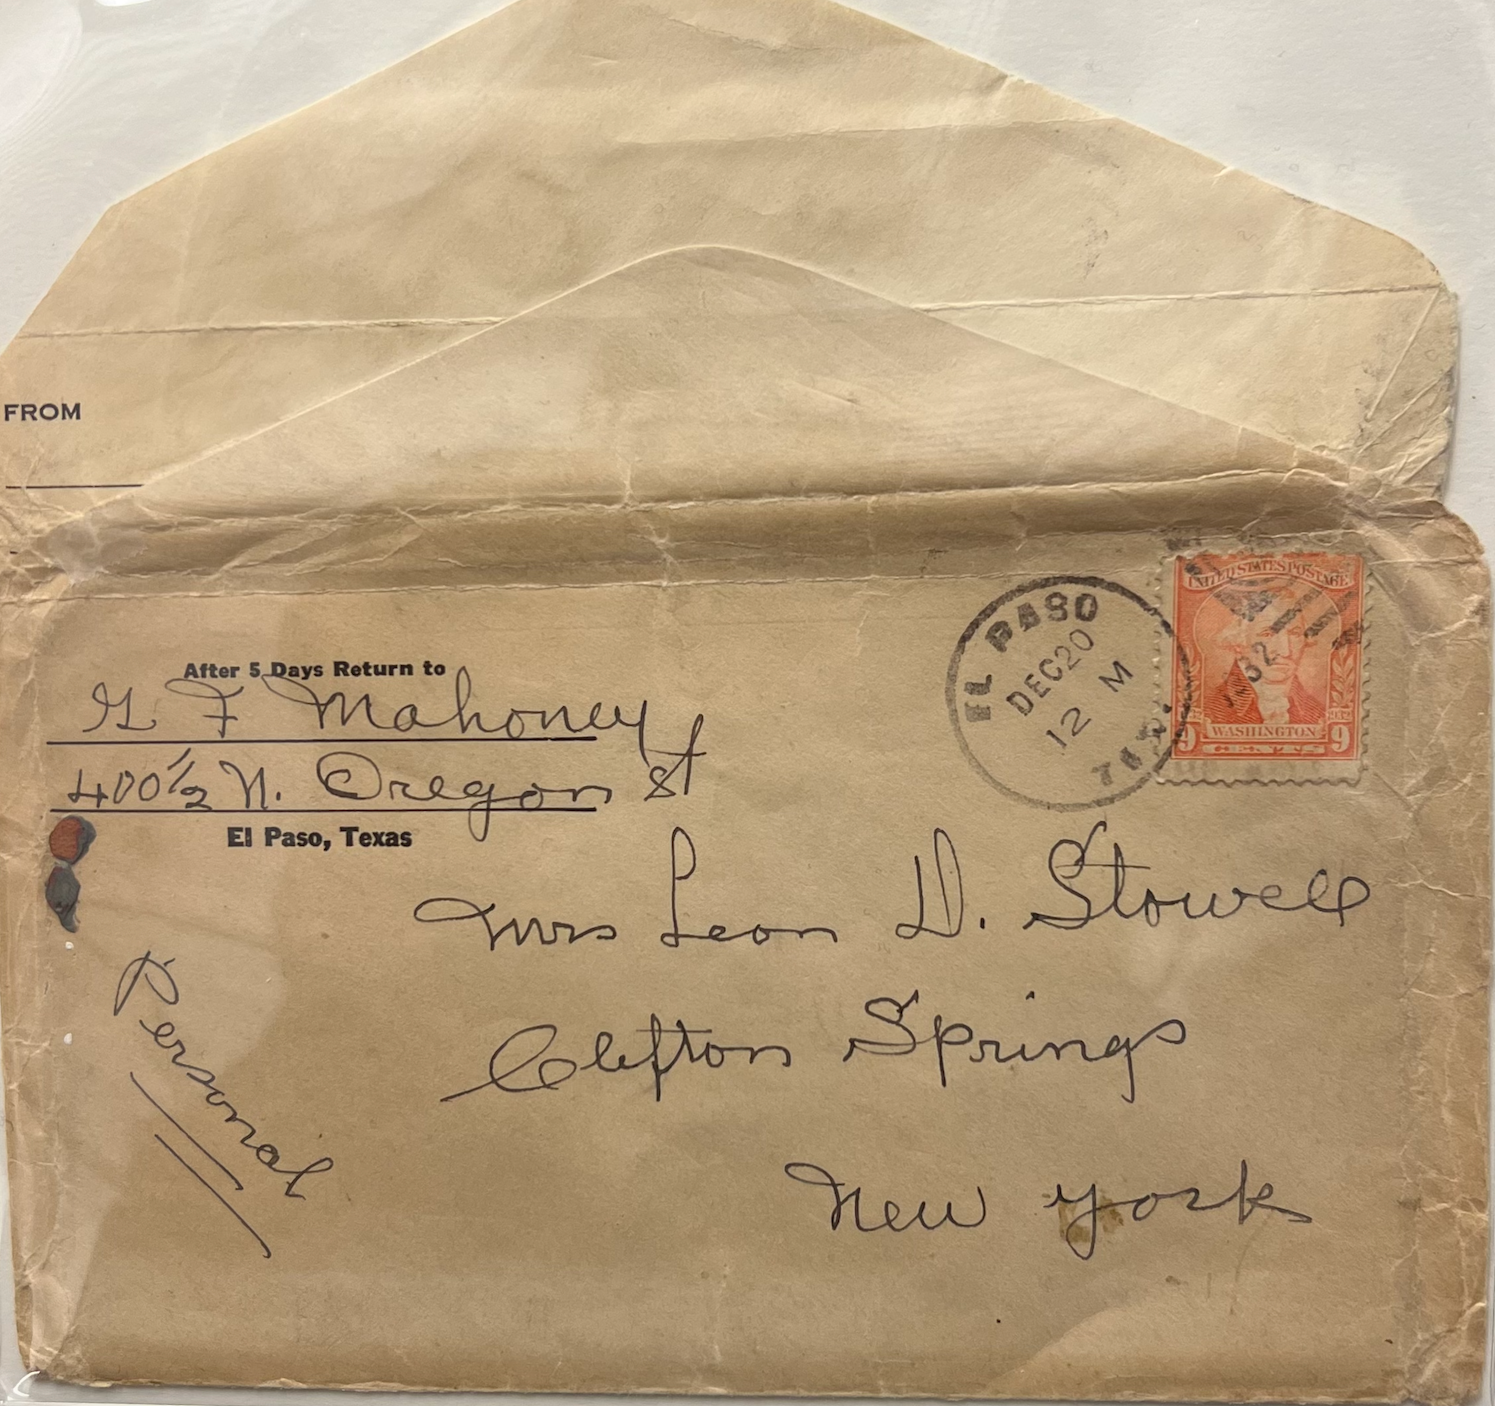 The light brown envelope encloses the journal and multiple-page entries from the Geo F. Mahoney journal (written in both print and cursive). They record the travel experiences and the letter of correspondence concluding the journal written for Mrs. Leon D. Stowell.